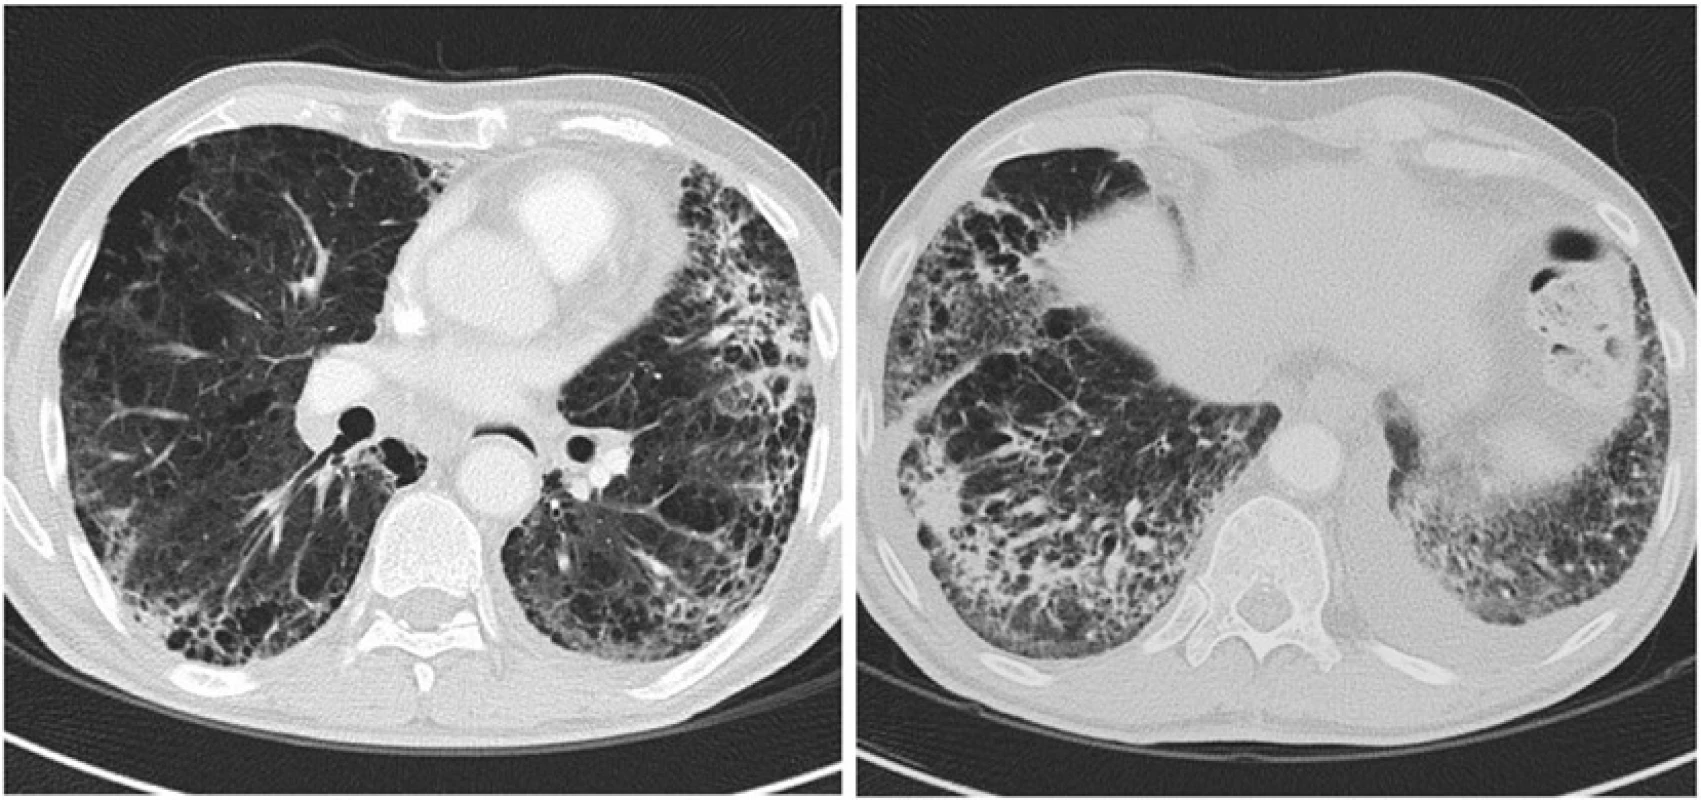 Chest CT scan image obtained at the time of clinical presentation with respiratory symptoms reveals nonspecific diffuse alveolar involvement